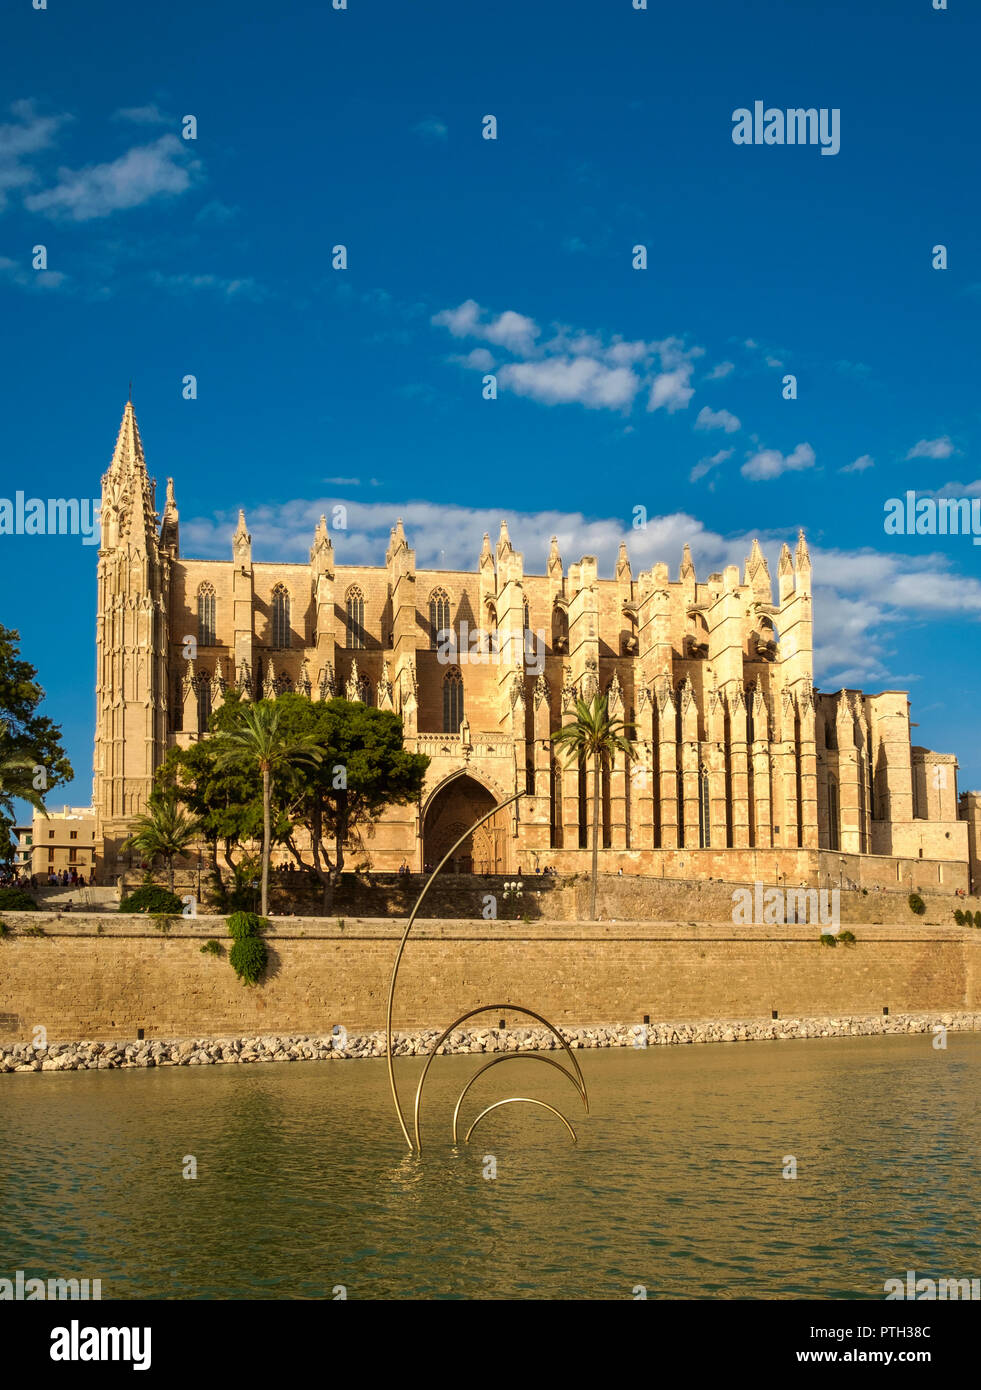 An abstract sculpture in the water in front of The Cathedral of Santa Maria of Palma, Mallorca, Spain Stock Photo